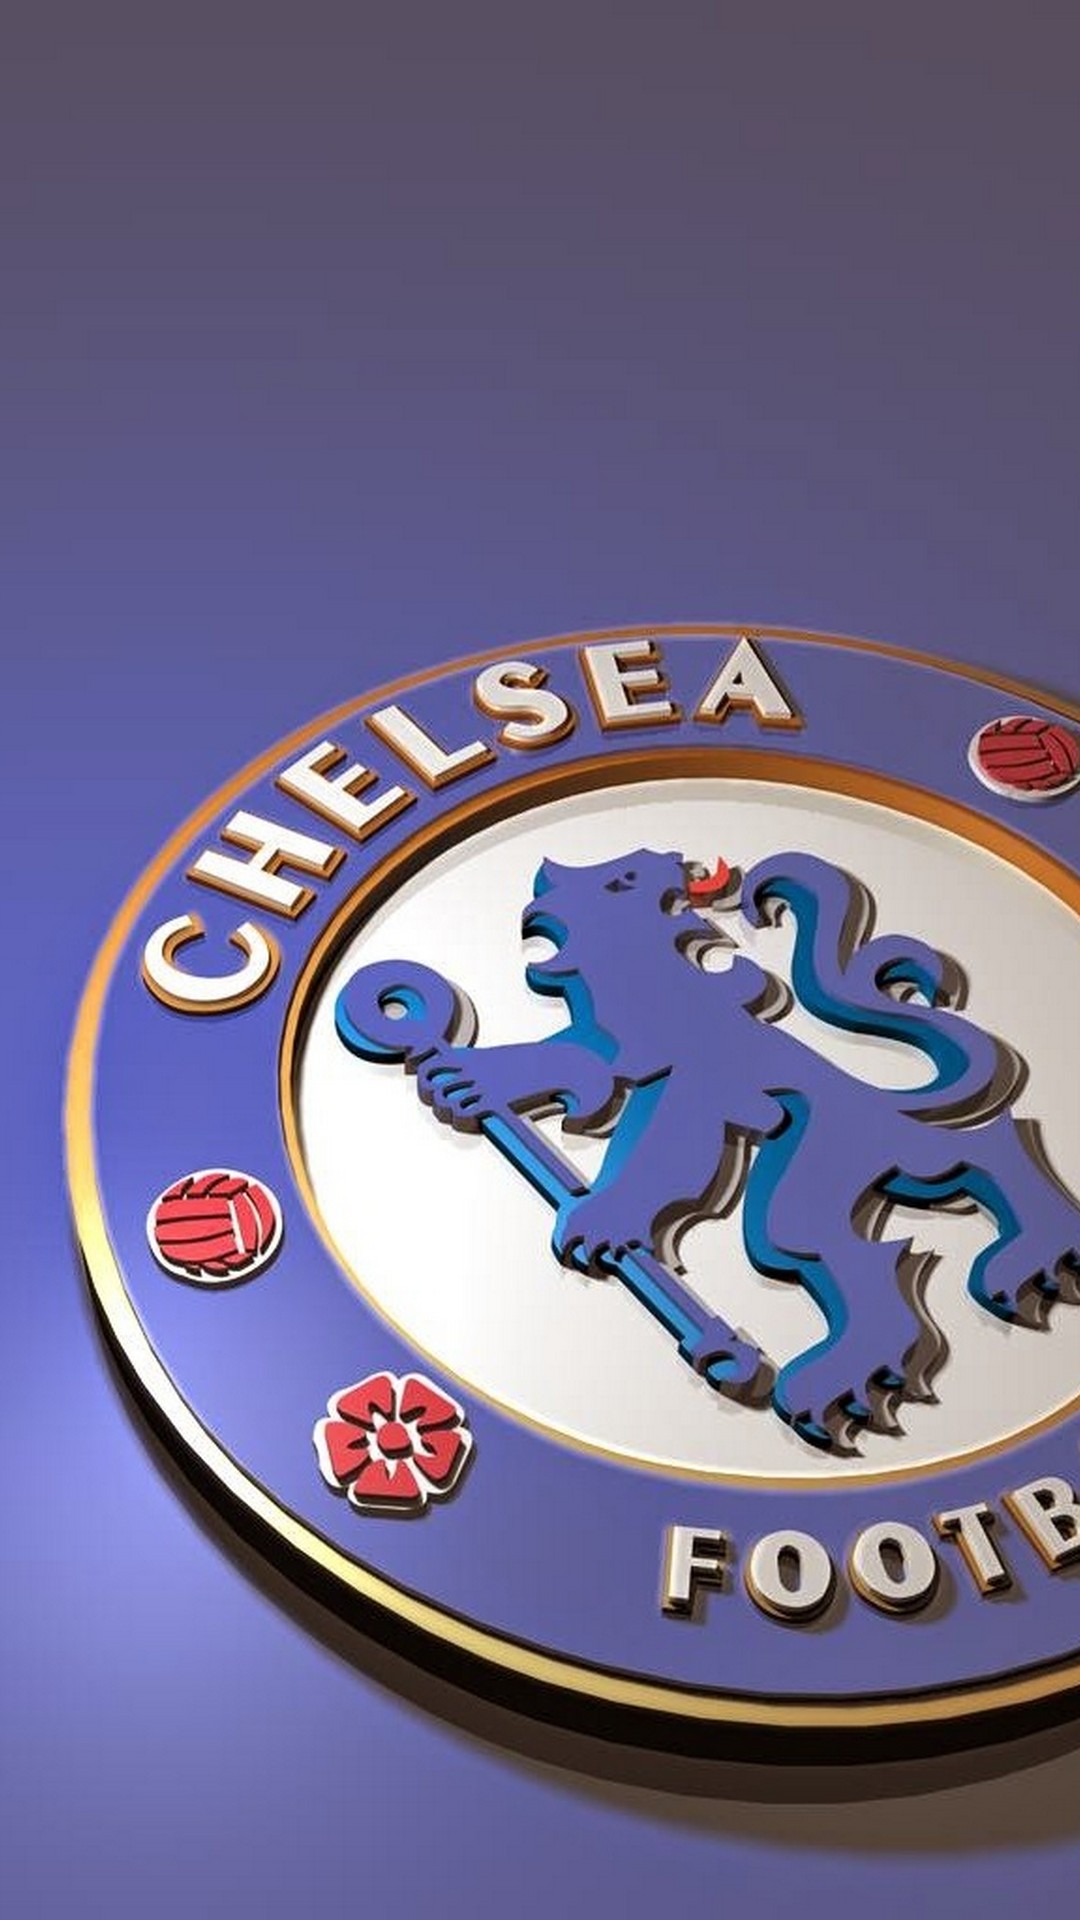 iPhone Wallpaper HD Chelsea Football Club with resolution 1080x1920 pixel. You can make this wallpaper for your Mac or Windows Desktop Background, iPhone, Android or Tablet and another Smartphone device